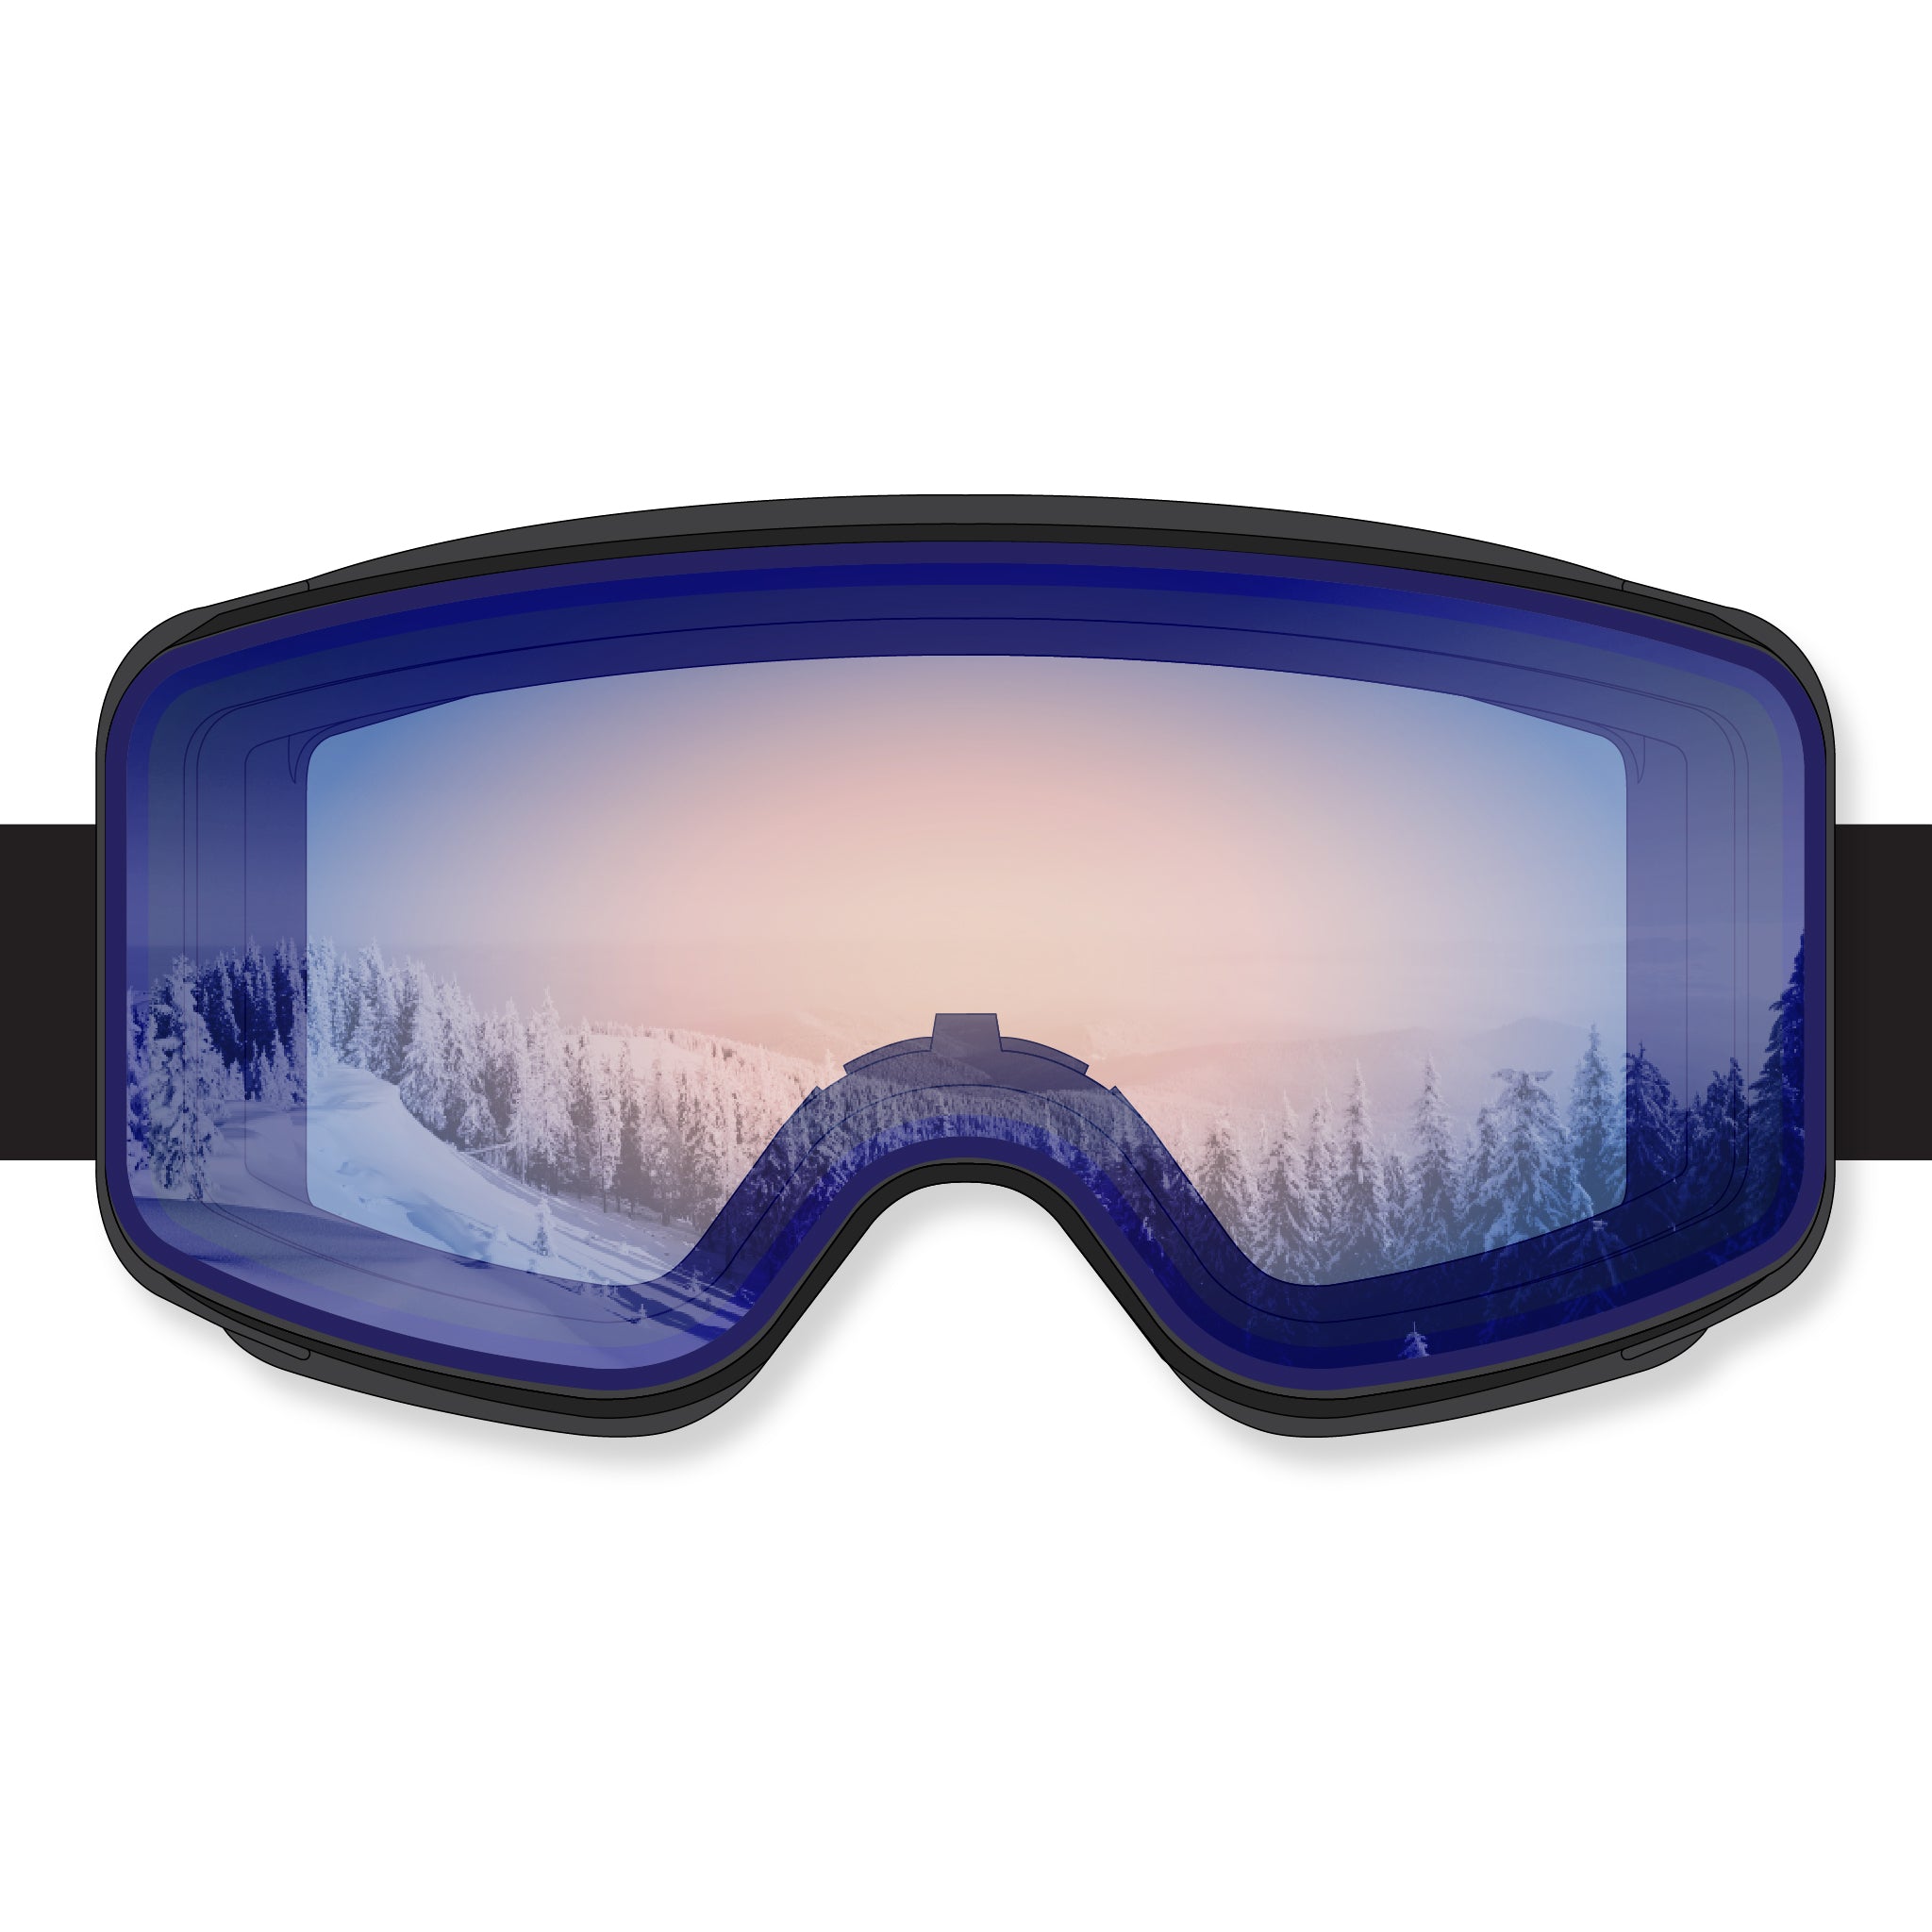 Product shot of the STAGE Cub Jr Ski Goggle featuring a black frame, Detector Revo lens, and black strap.